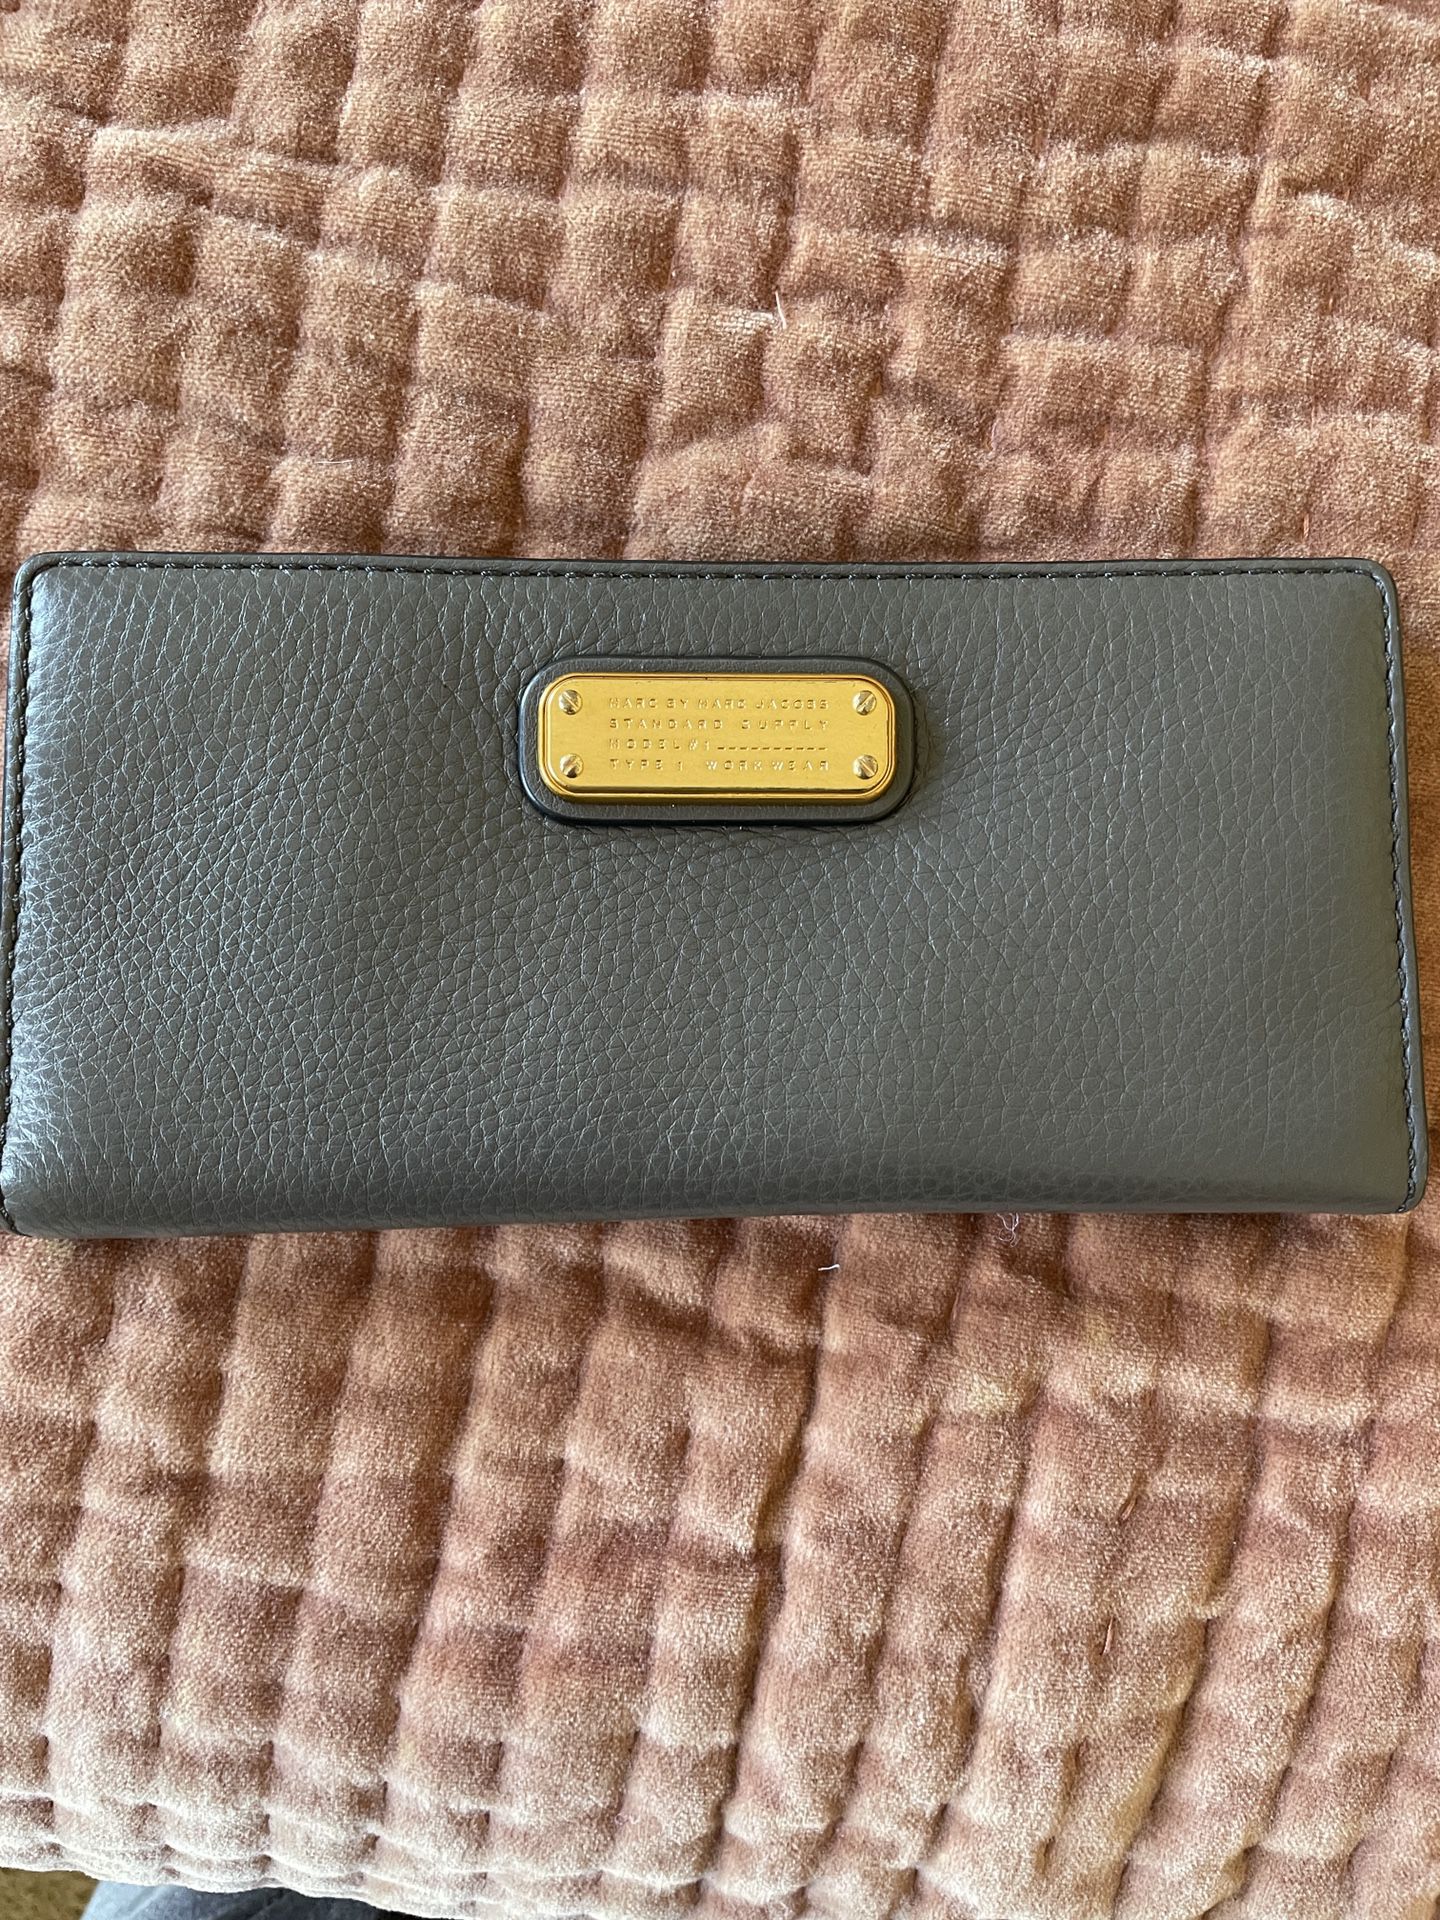 Marc by Marc Jacobs wallet